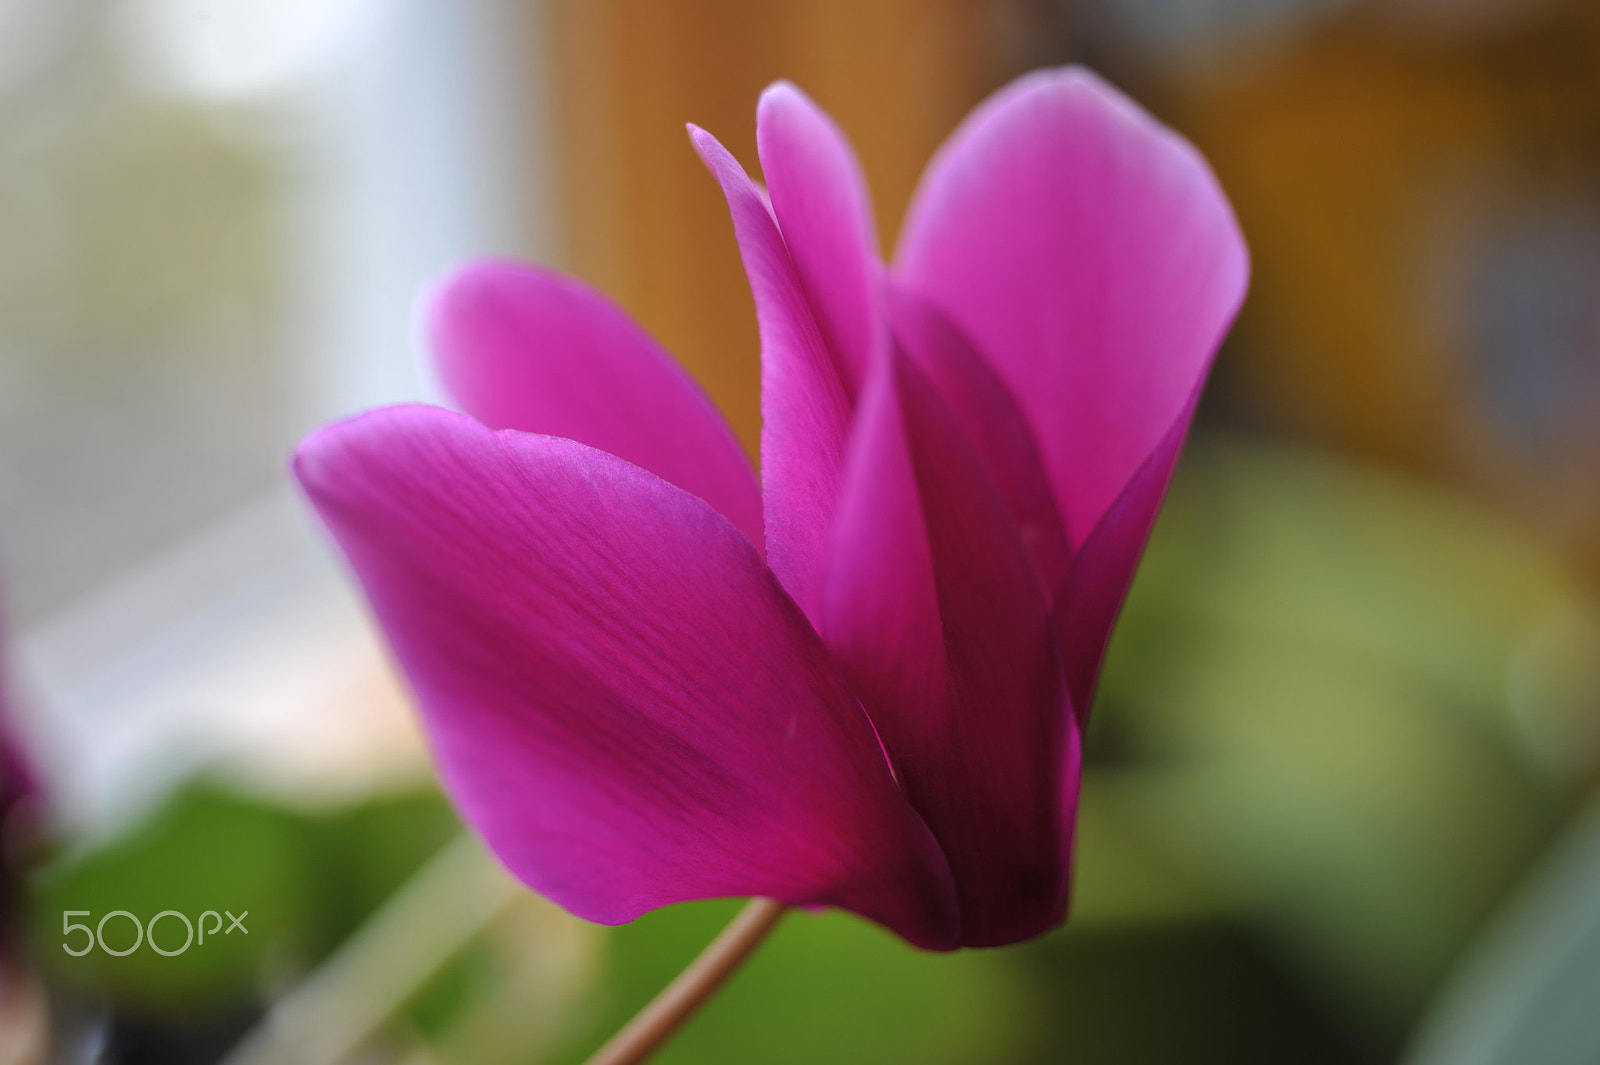 AF Micro-Nikkor 55mm f/2.8 sample photo. Cyclamen photography